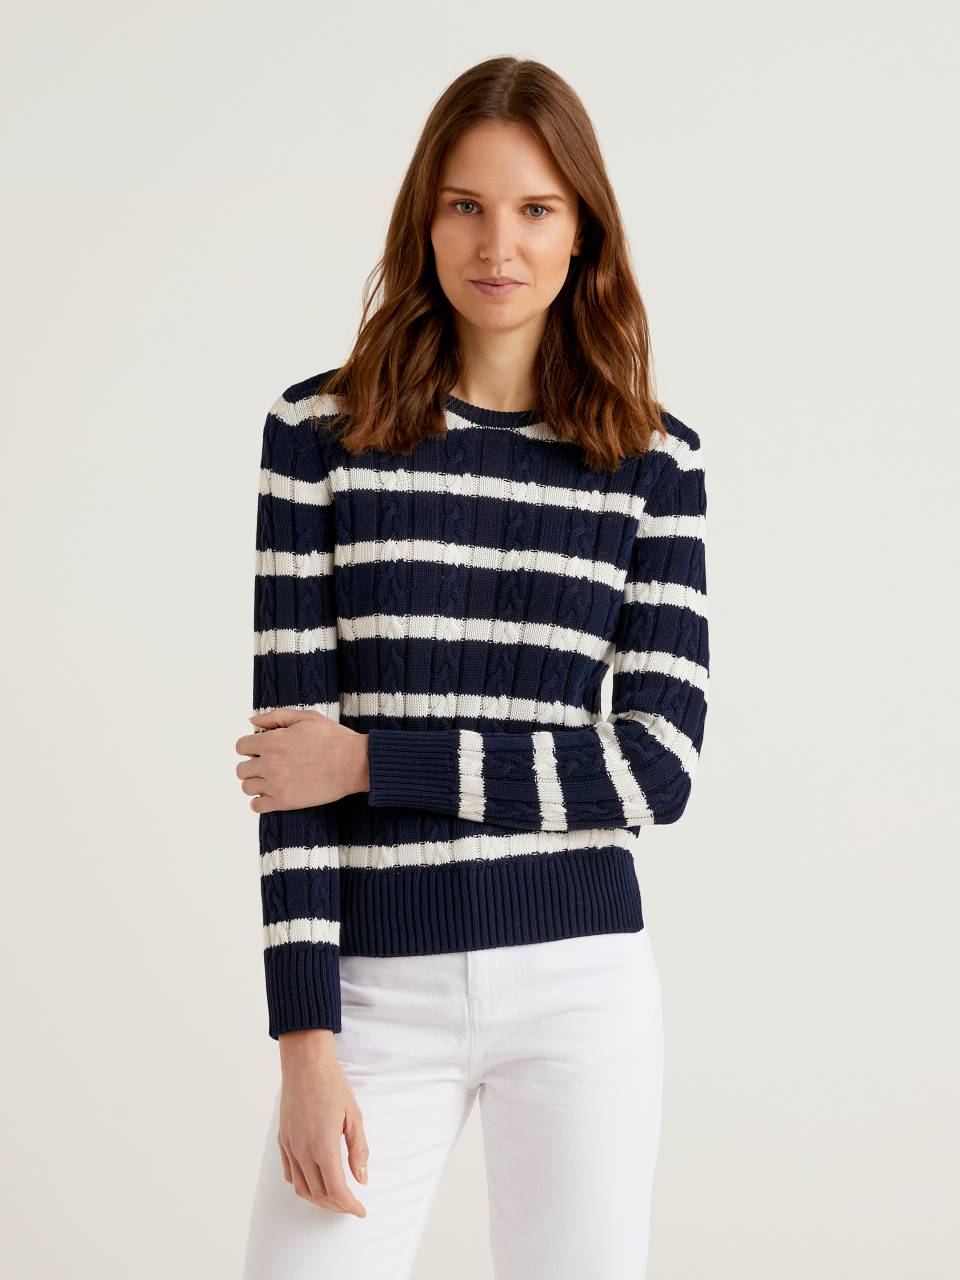 Benetton Cable knit sweater 100% cotton. 1